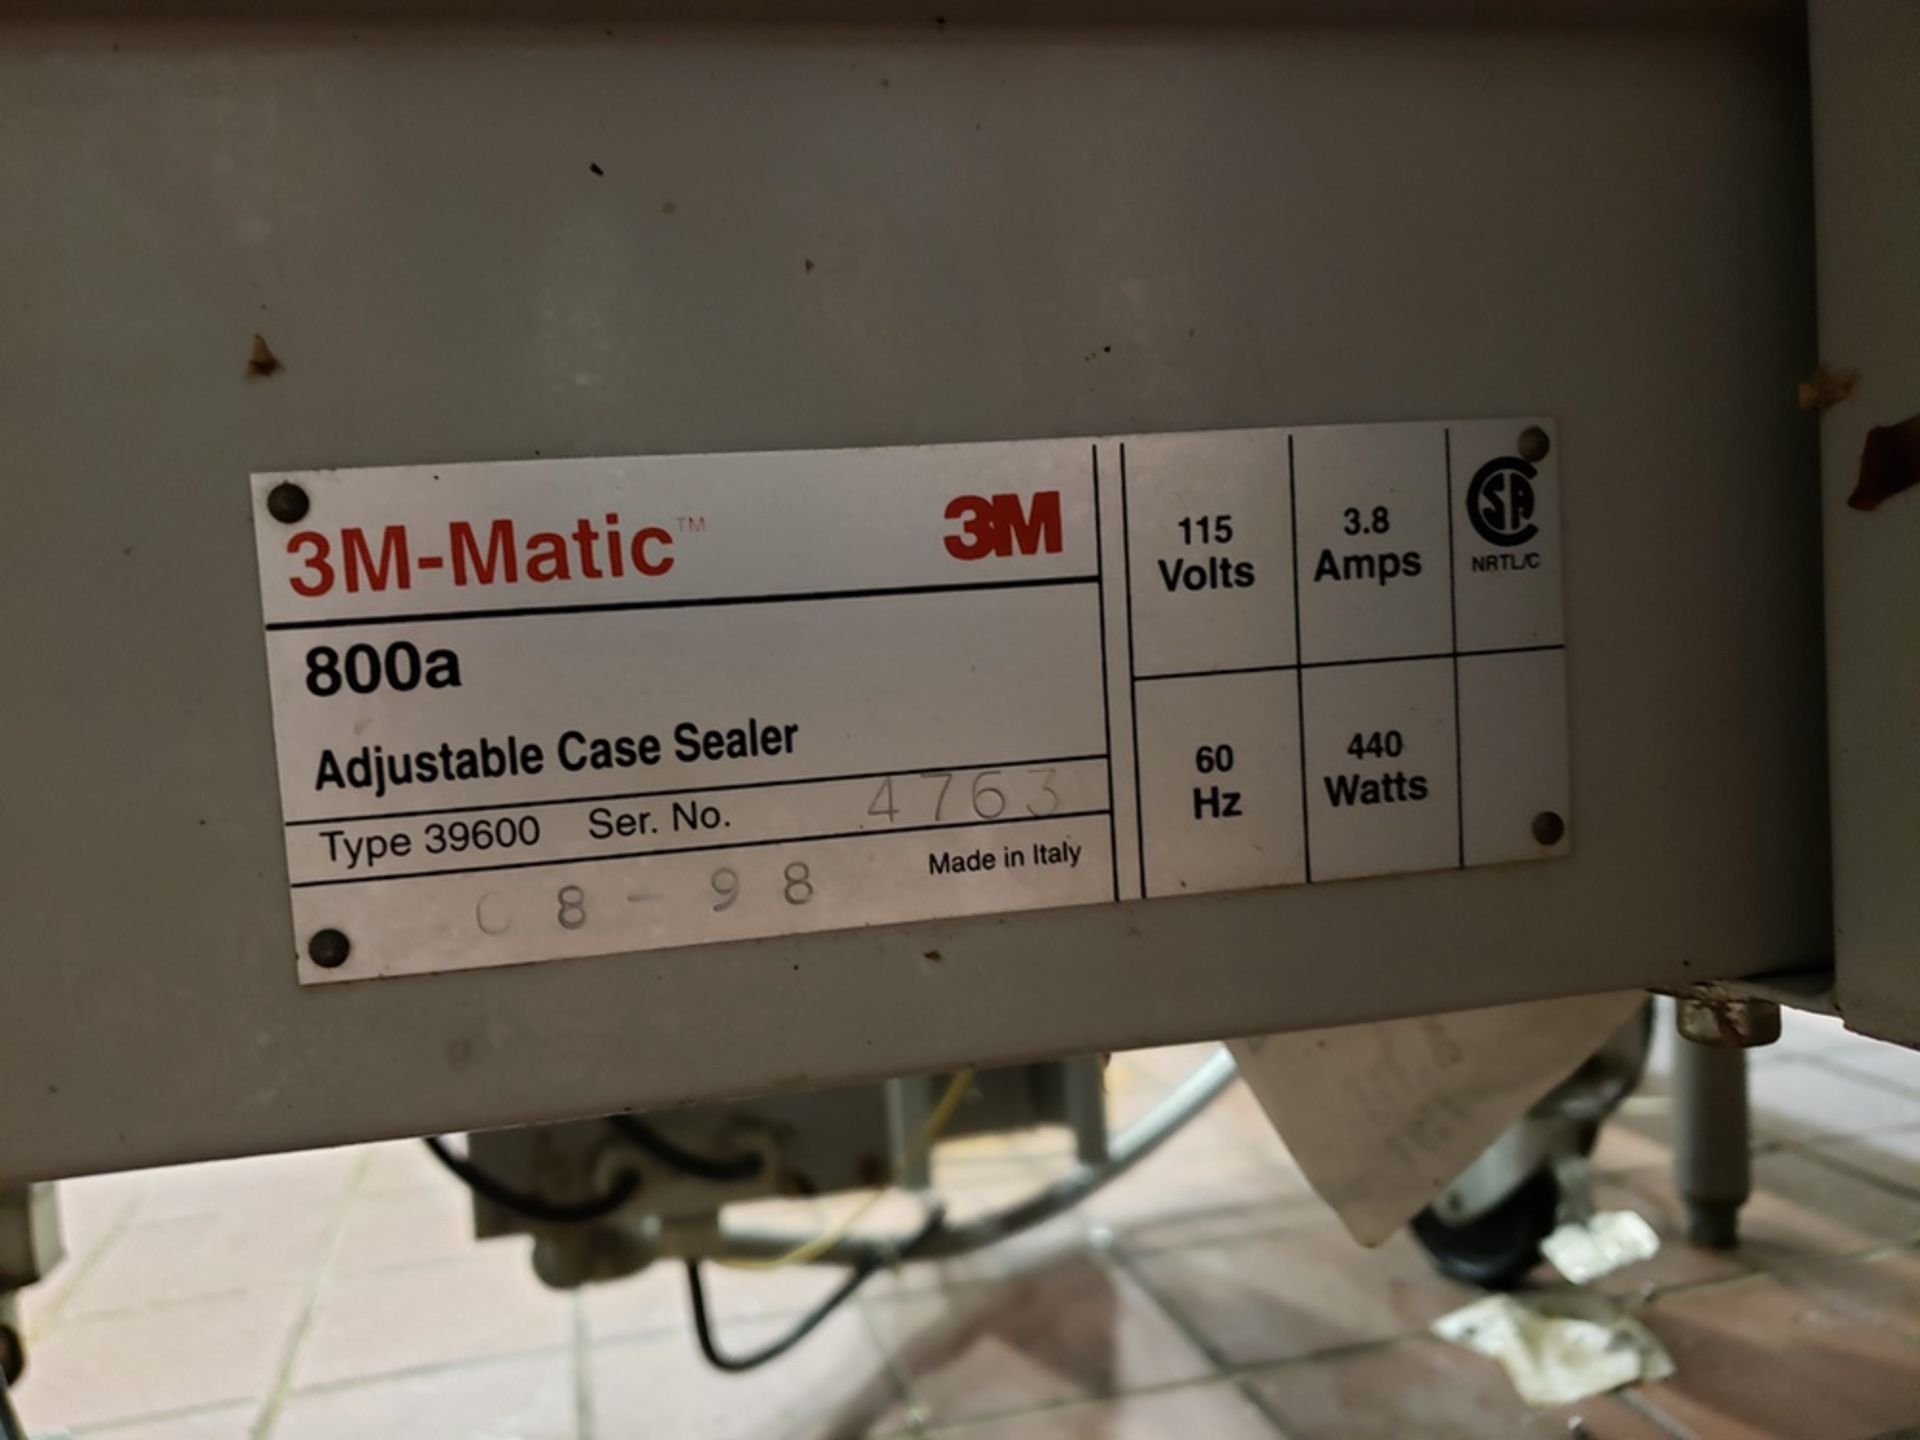 3M-Matic Case Sealer, M# 800A, S/N 4763 | Subj to Bulk | Rig Fee: $150 - Image 2 of 2